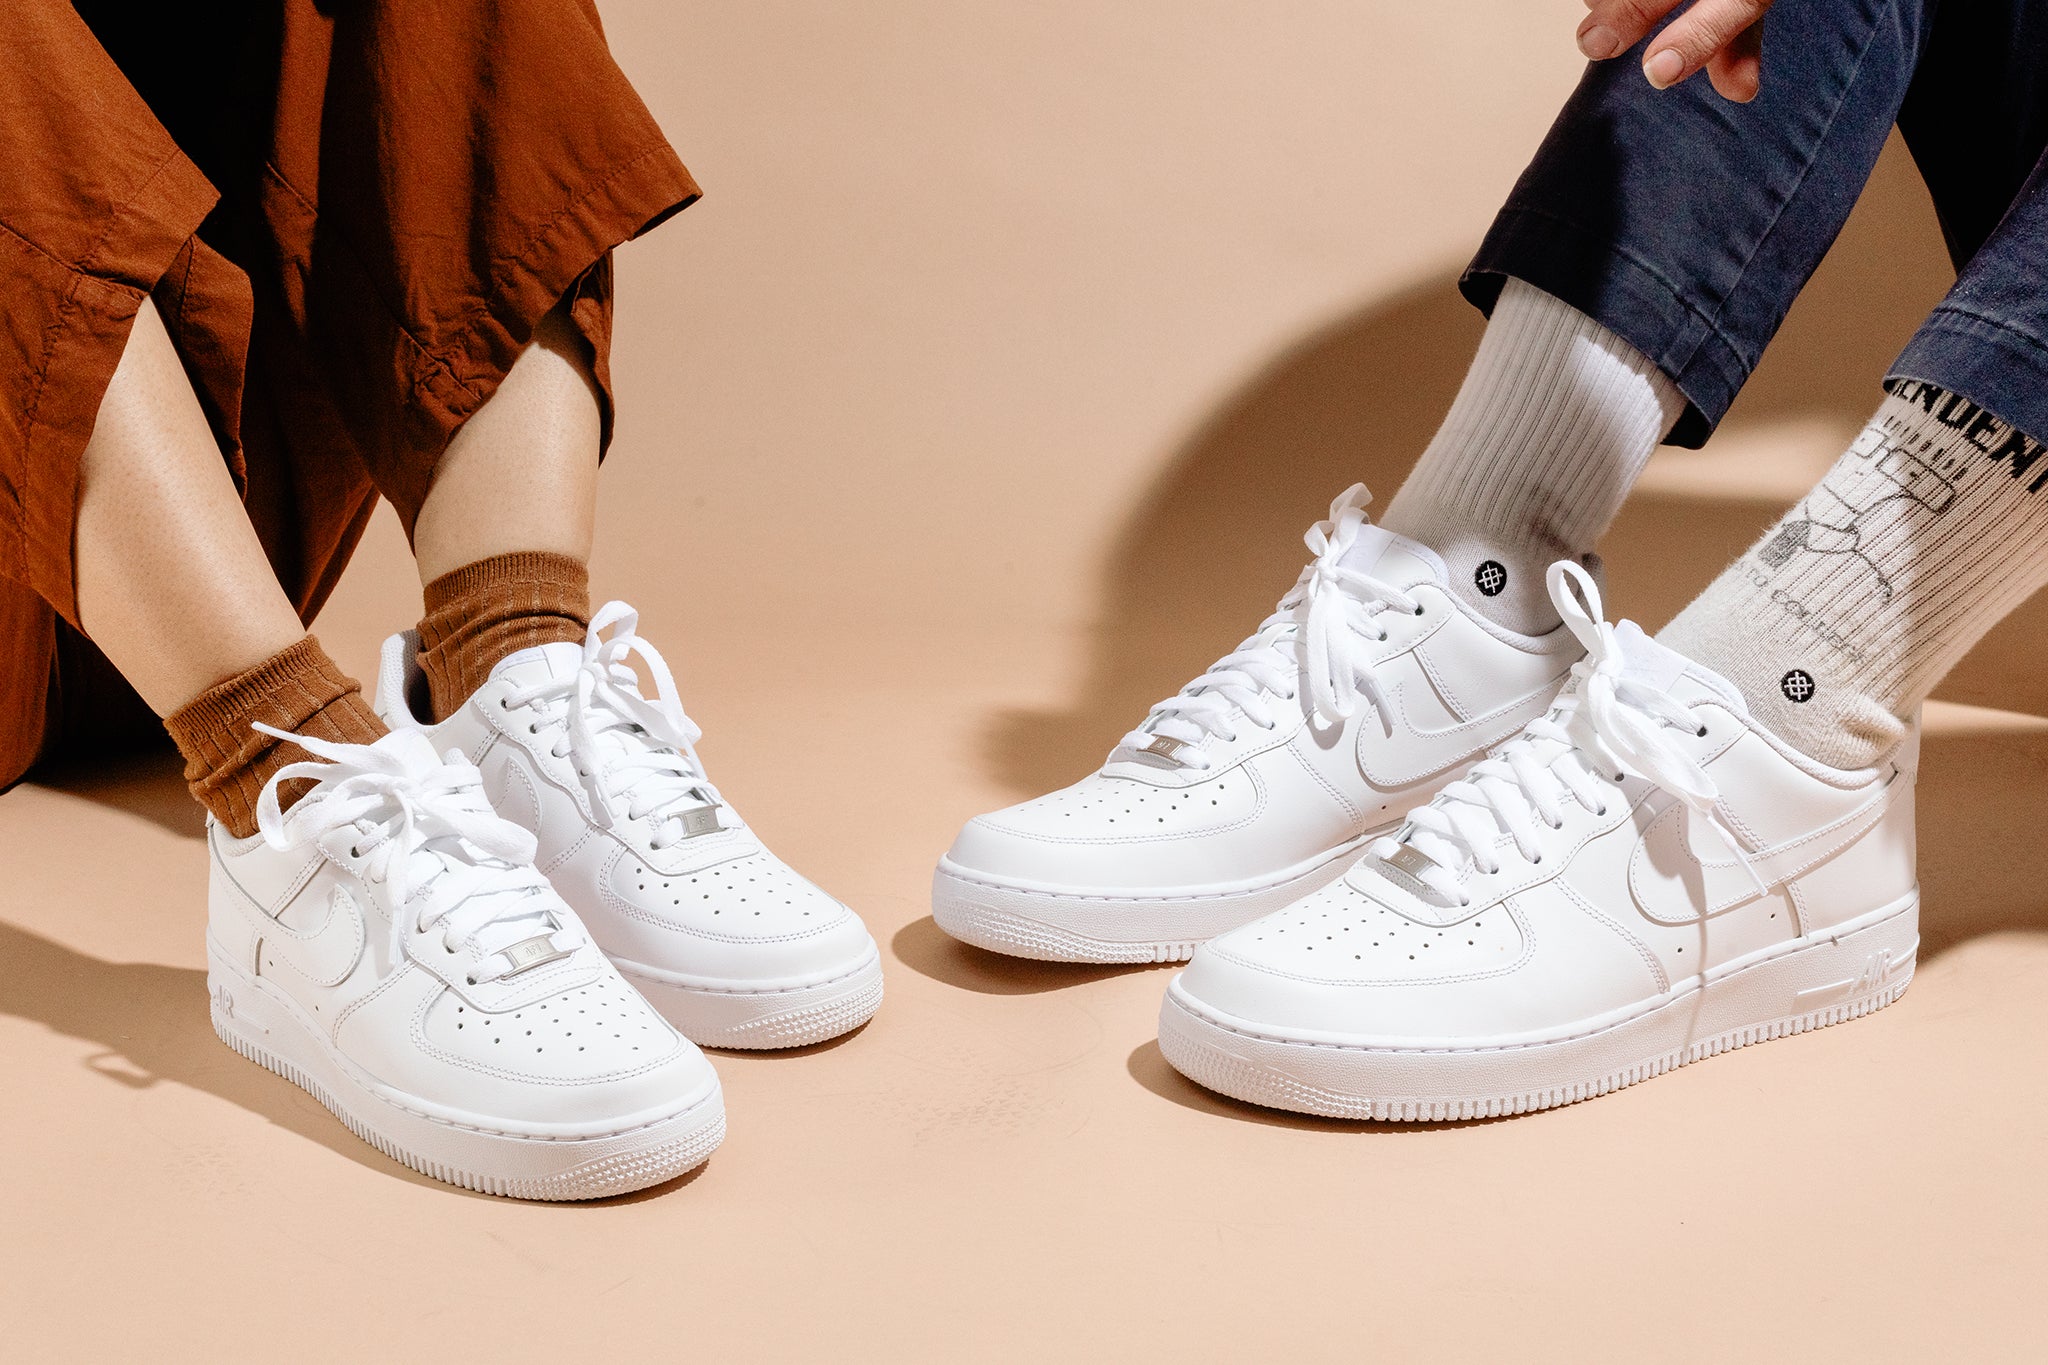 The 5 Best White Sneakers for Women & Men of 2022 | Reviews by Wirecutter